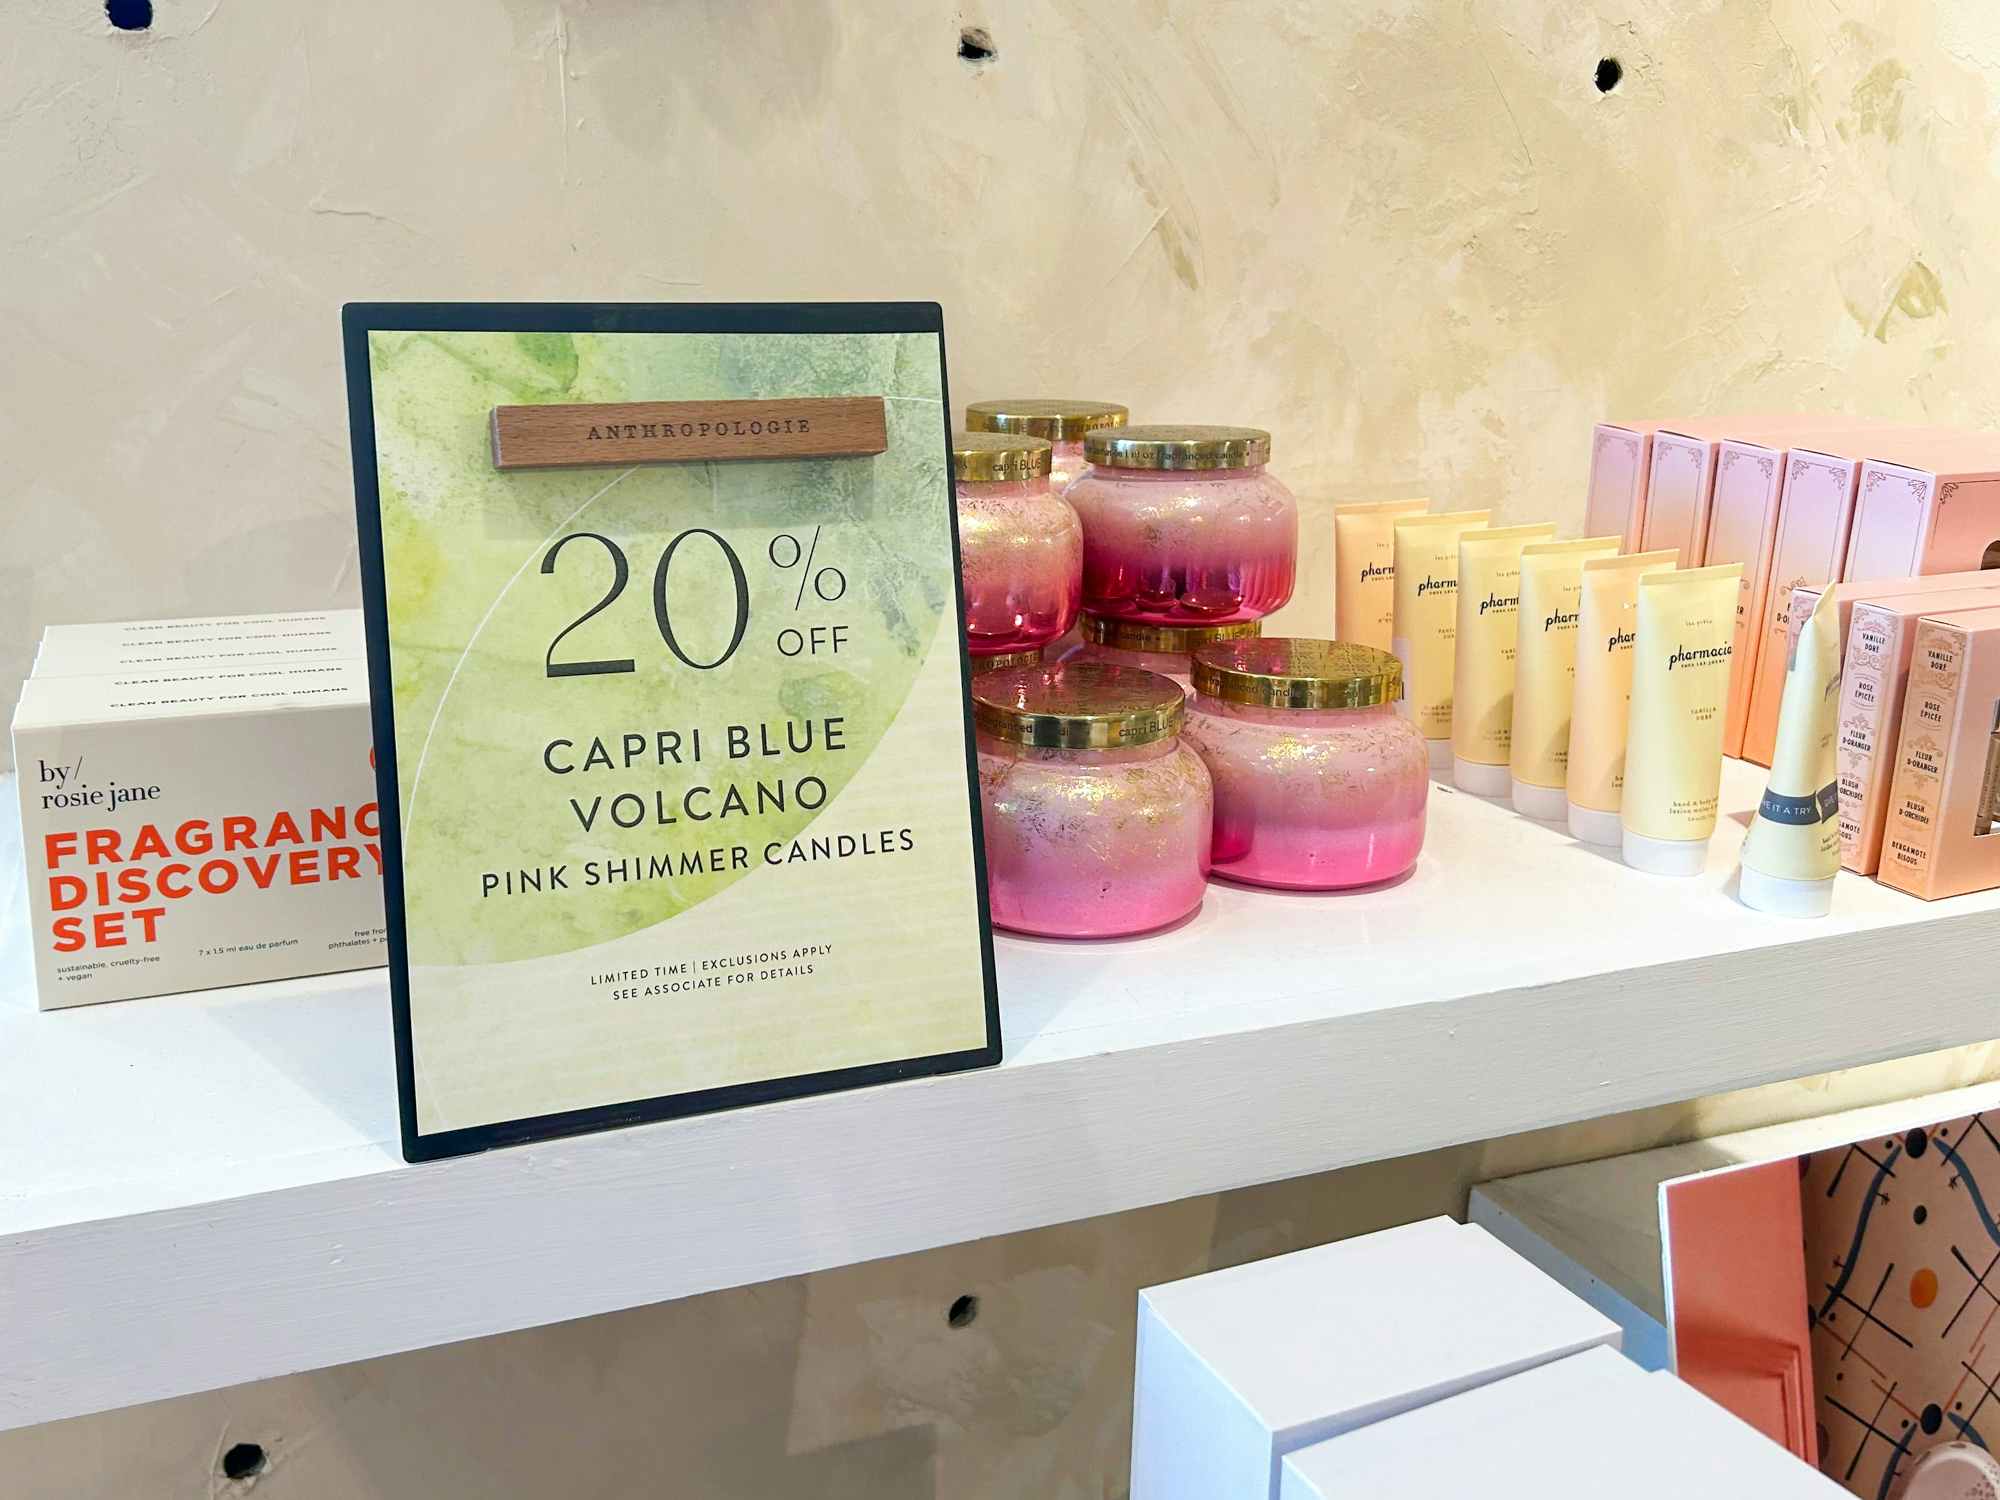 A sign for a sale at Anthropologie for 20% off Capri candles